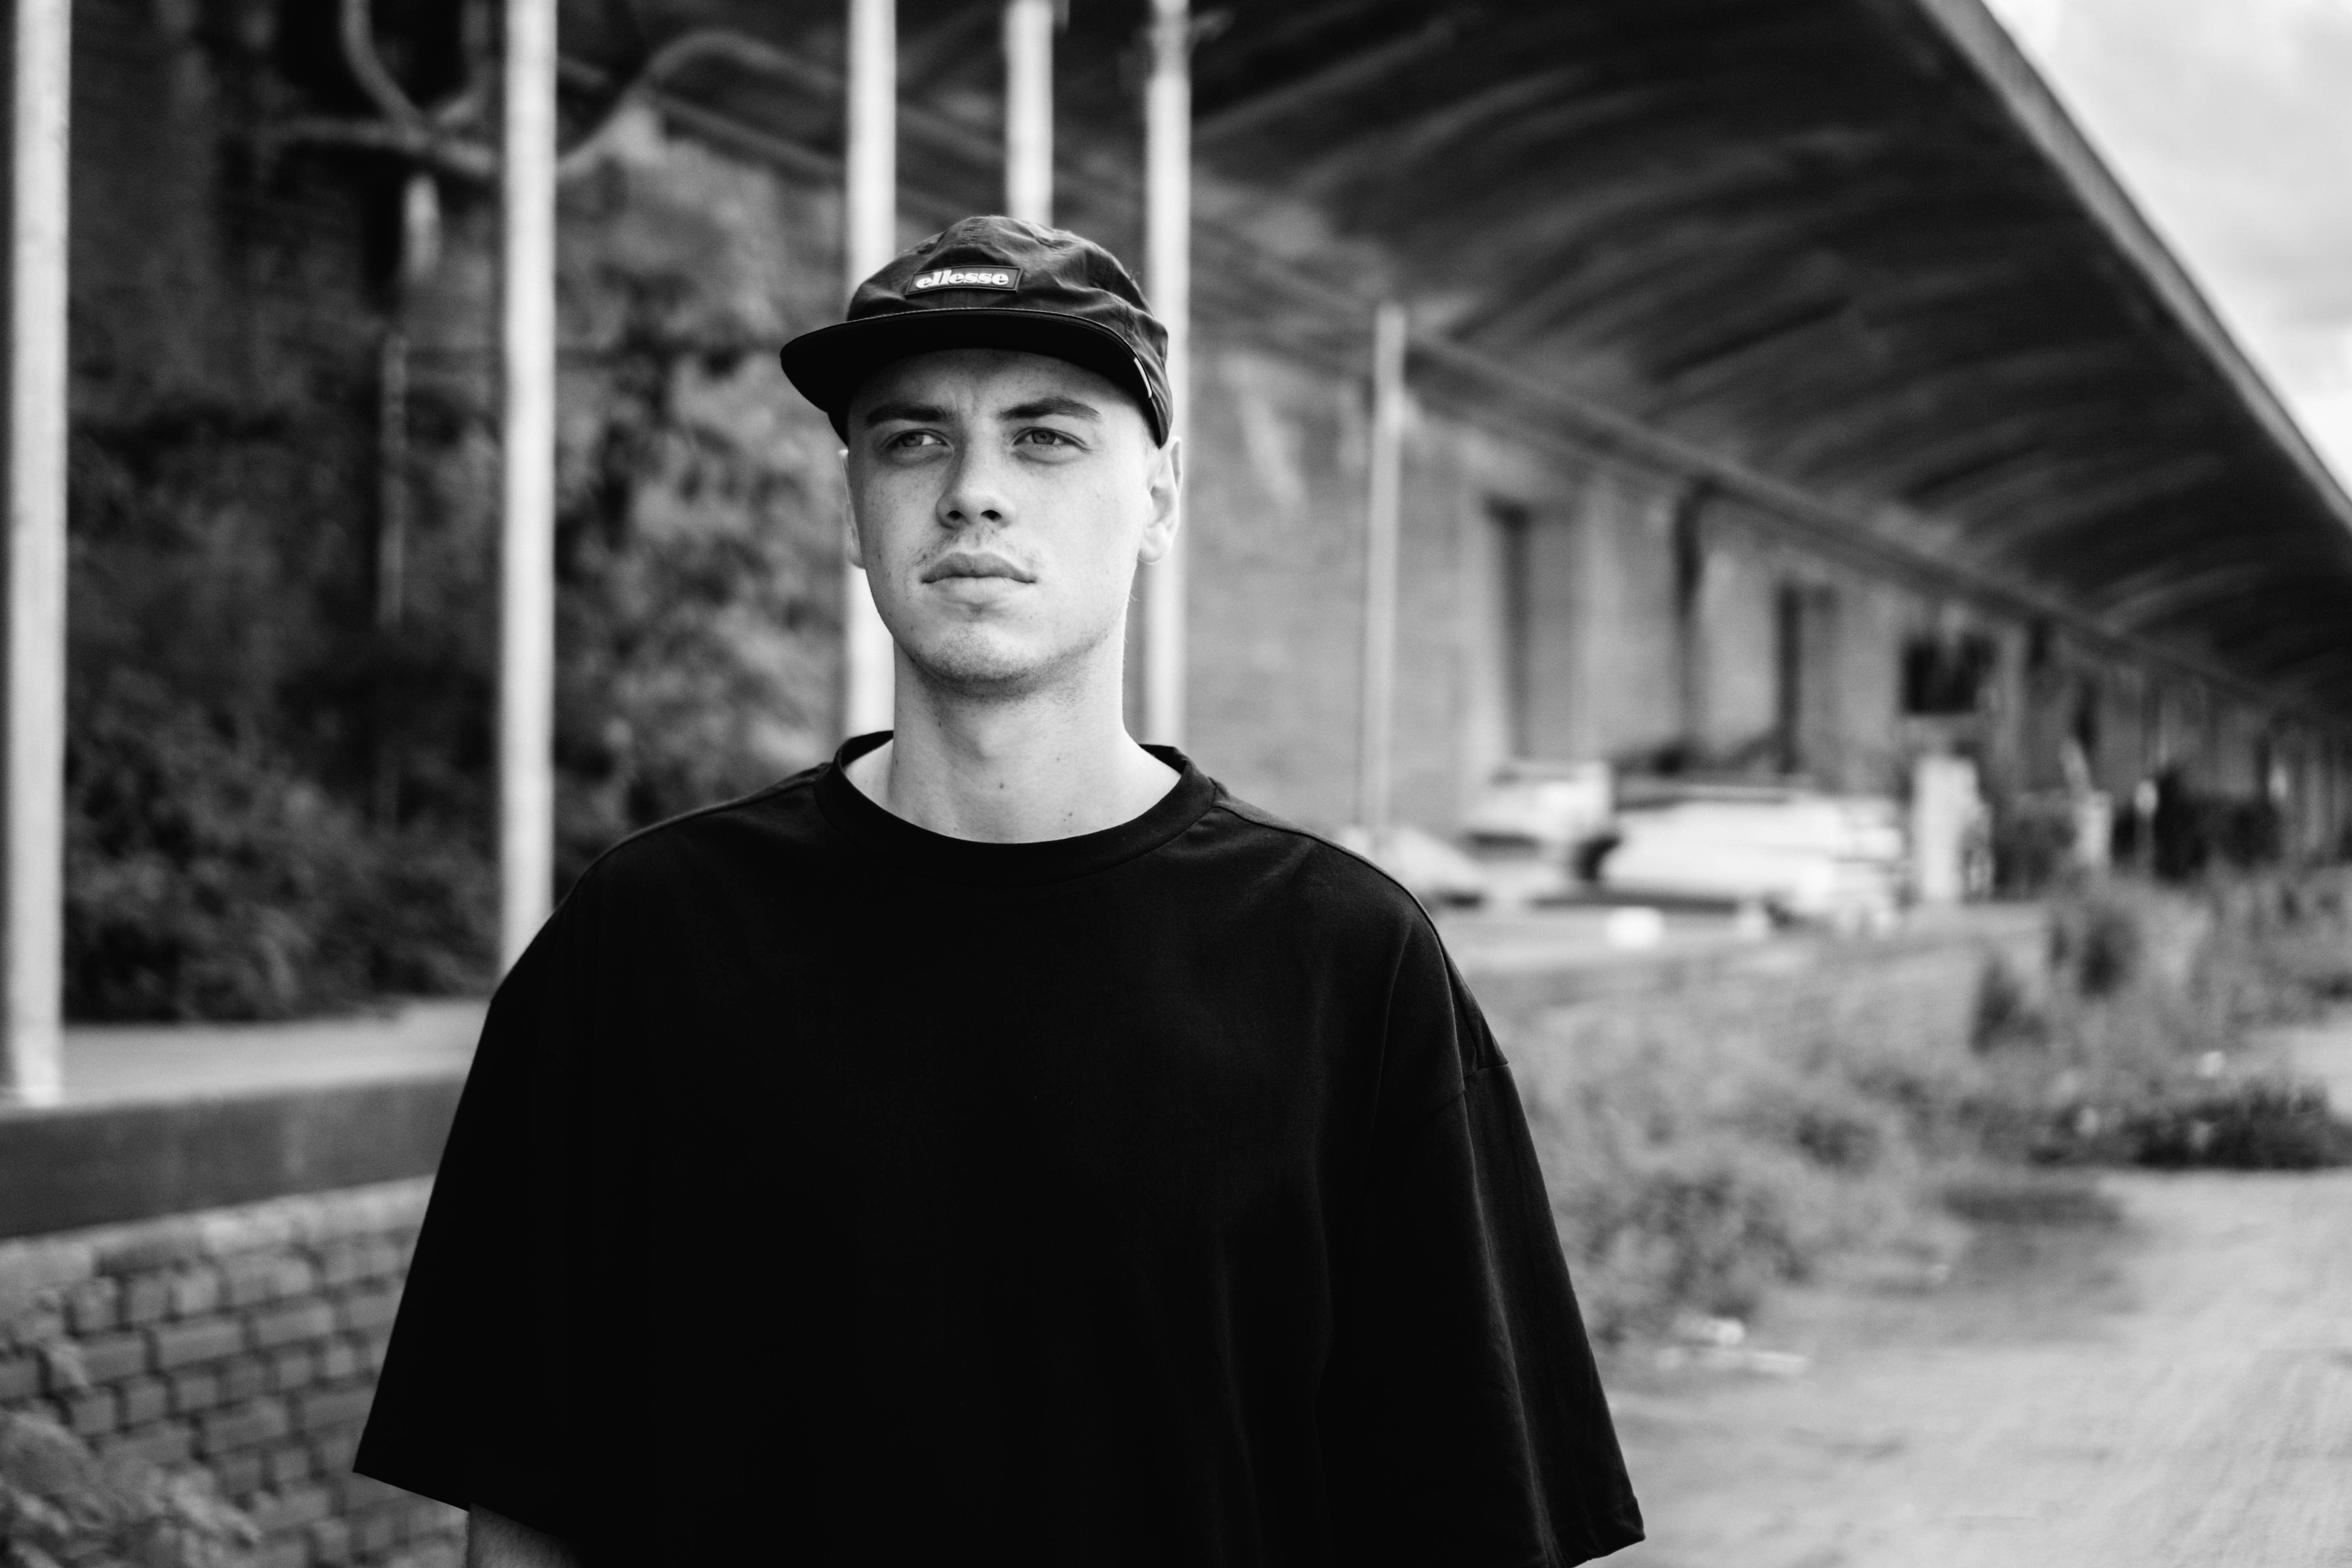 Meet Vintash – Up and coming Cologne producer